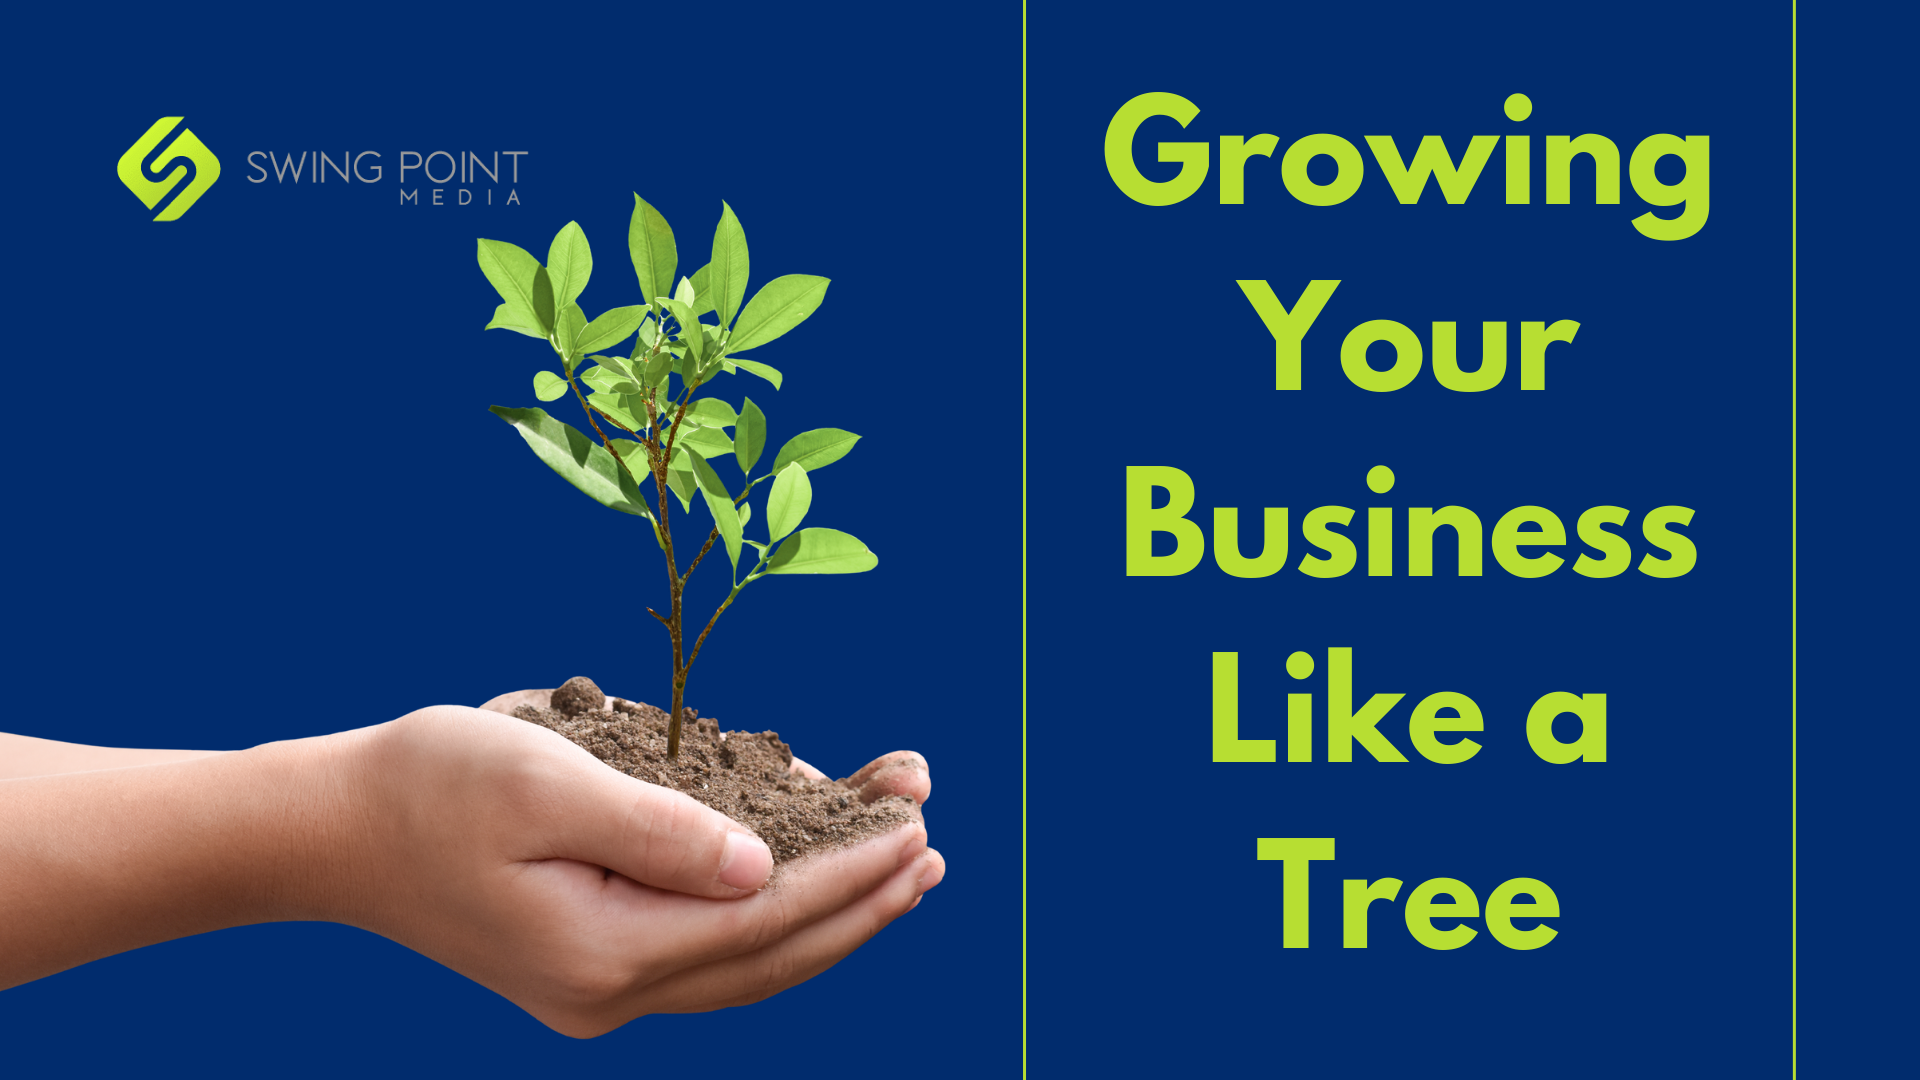 Growing Your Business Like a Tree: Content Services